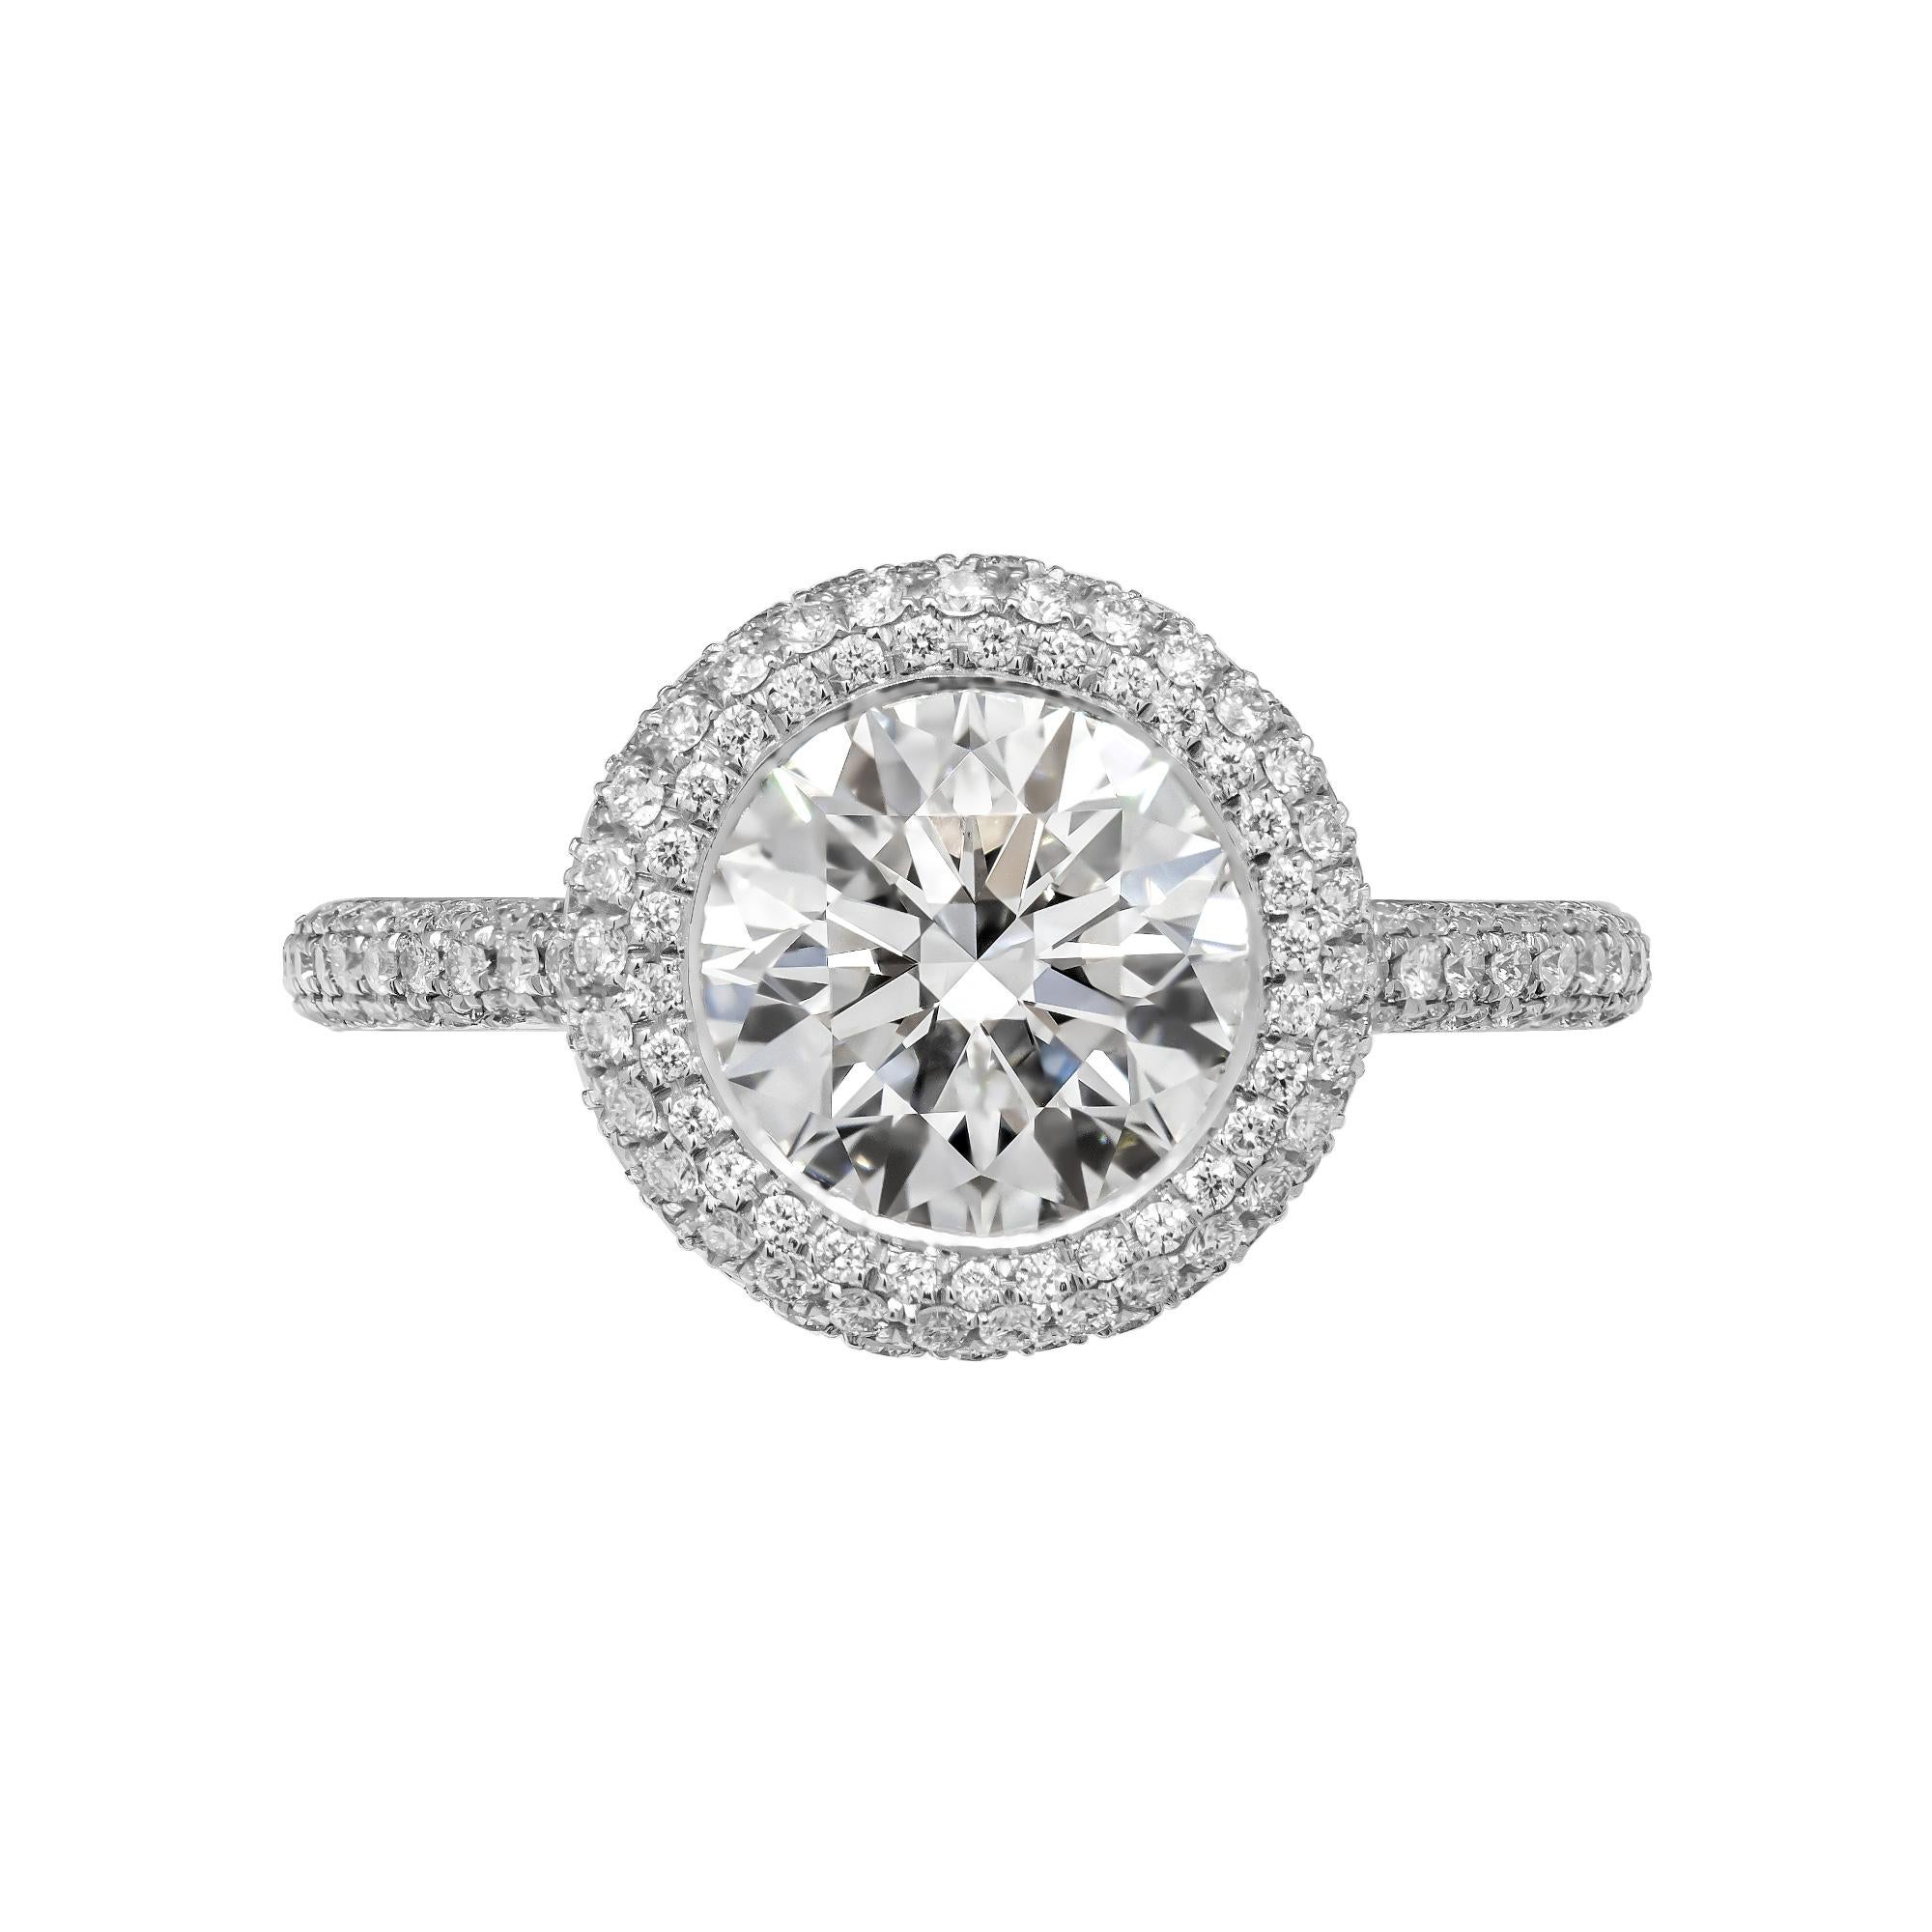 Timeless Classic Round Diamond Engagement - Timeless classis with a modern spin
Mounted in Platinum, featuring exceptional pave work that compliments the center stone,
Mounting features 3 row rounded halo around center & 3 row of round brilliant cut